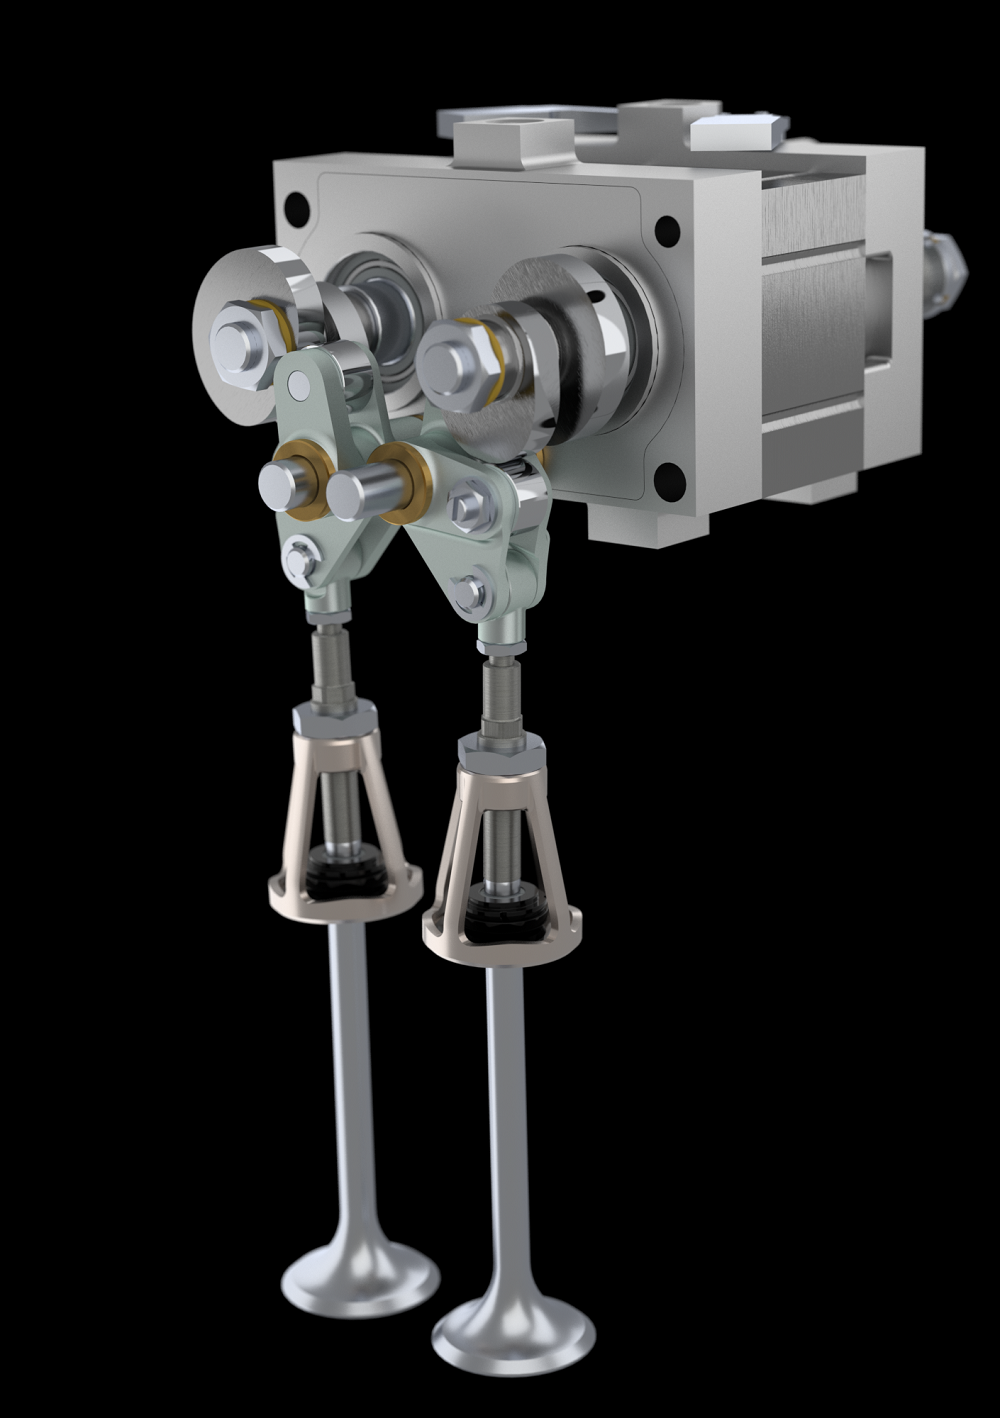 Camcon's valve actuation system